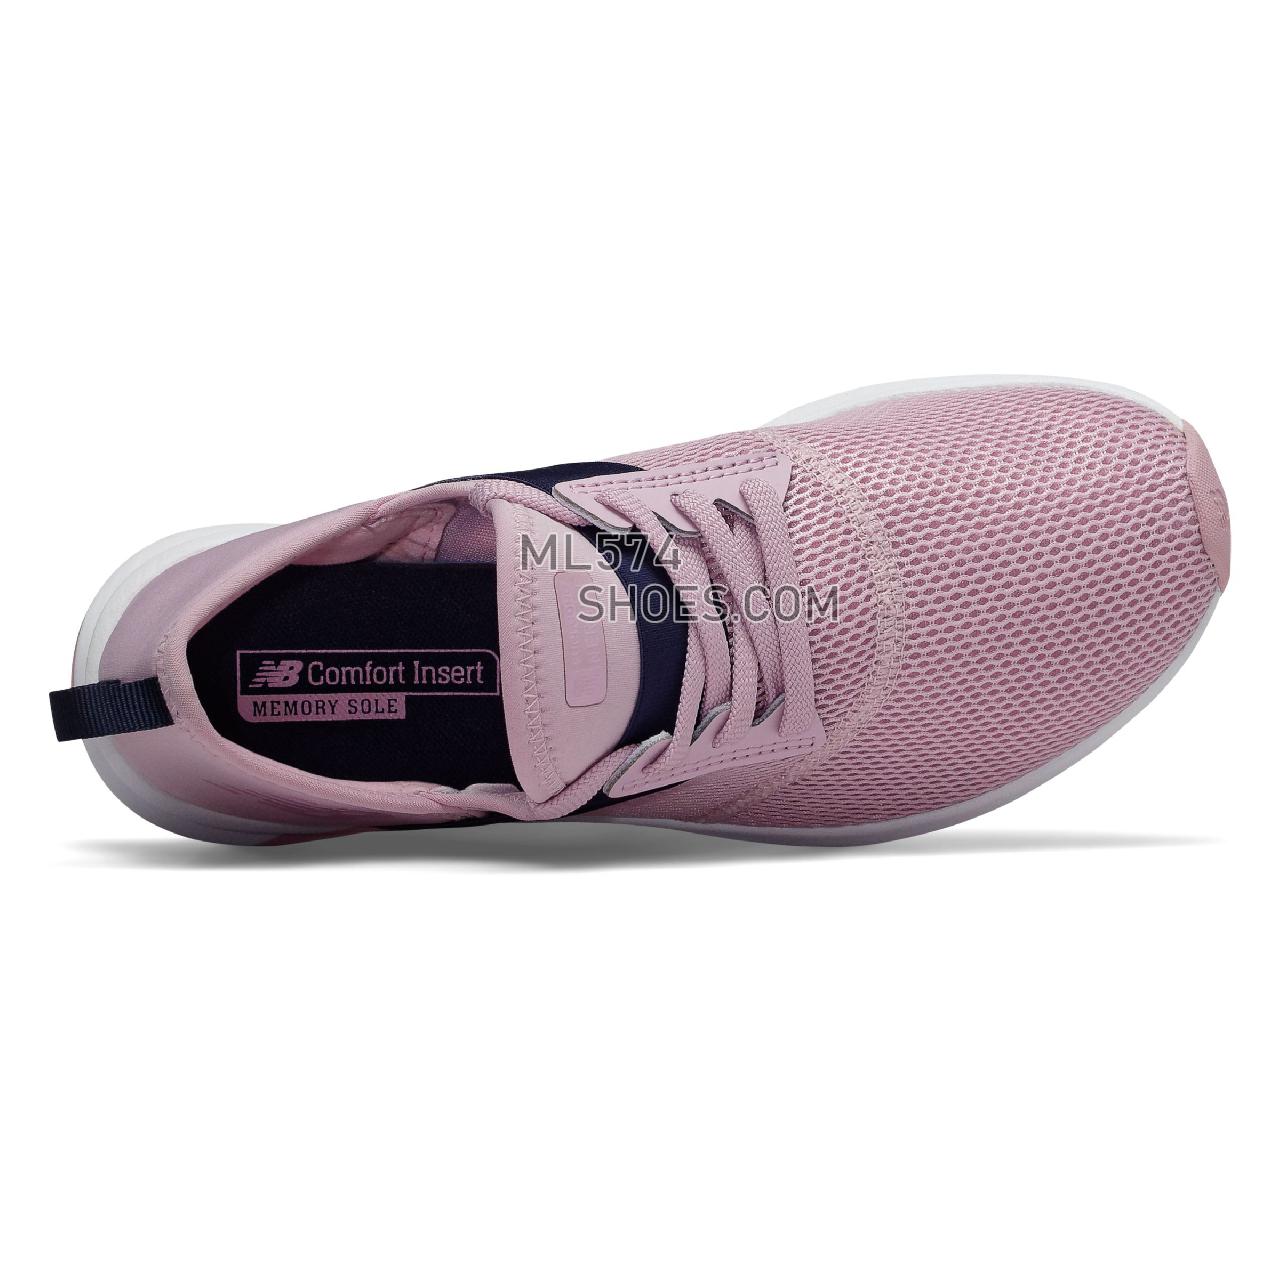 New Balance FuelCore NB Nergize - Women's FuelCore NB Nergize - Oxygen Pink with Pigment - WXNRGGP